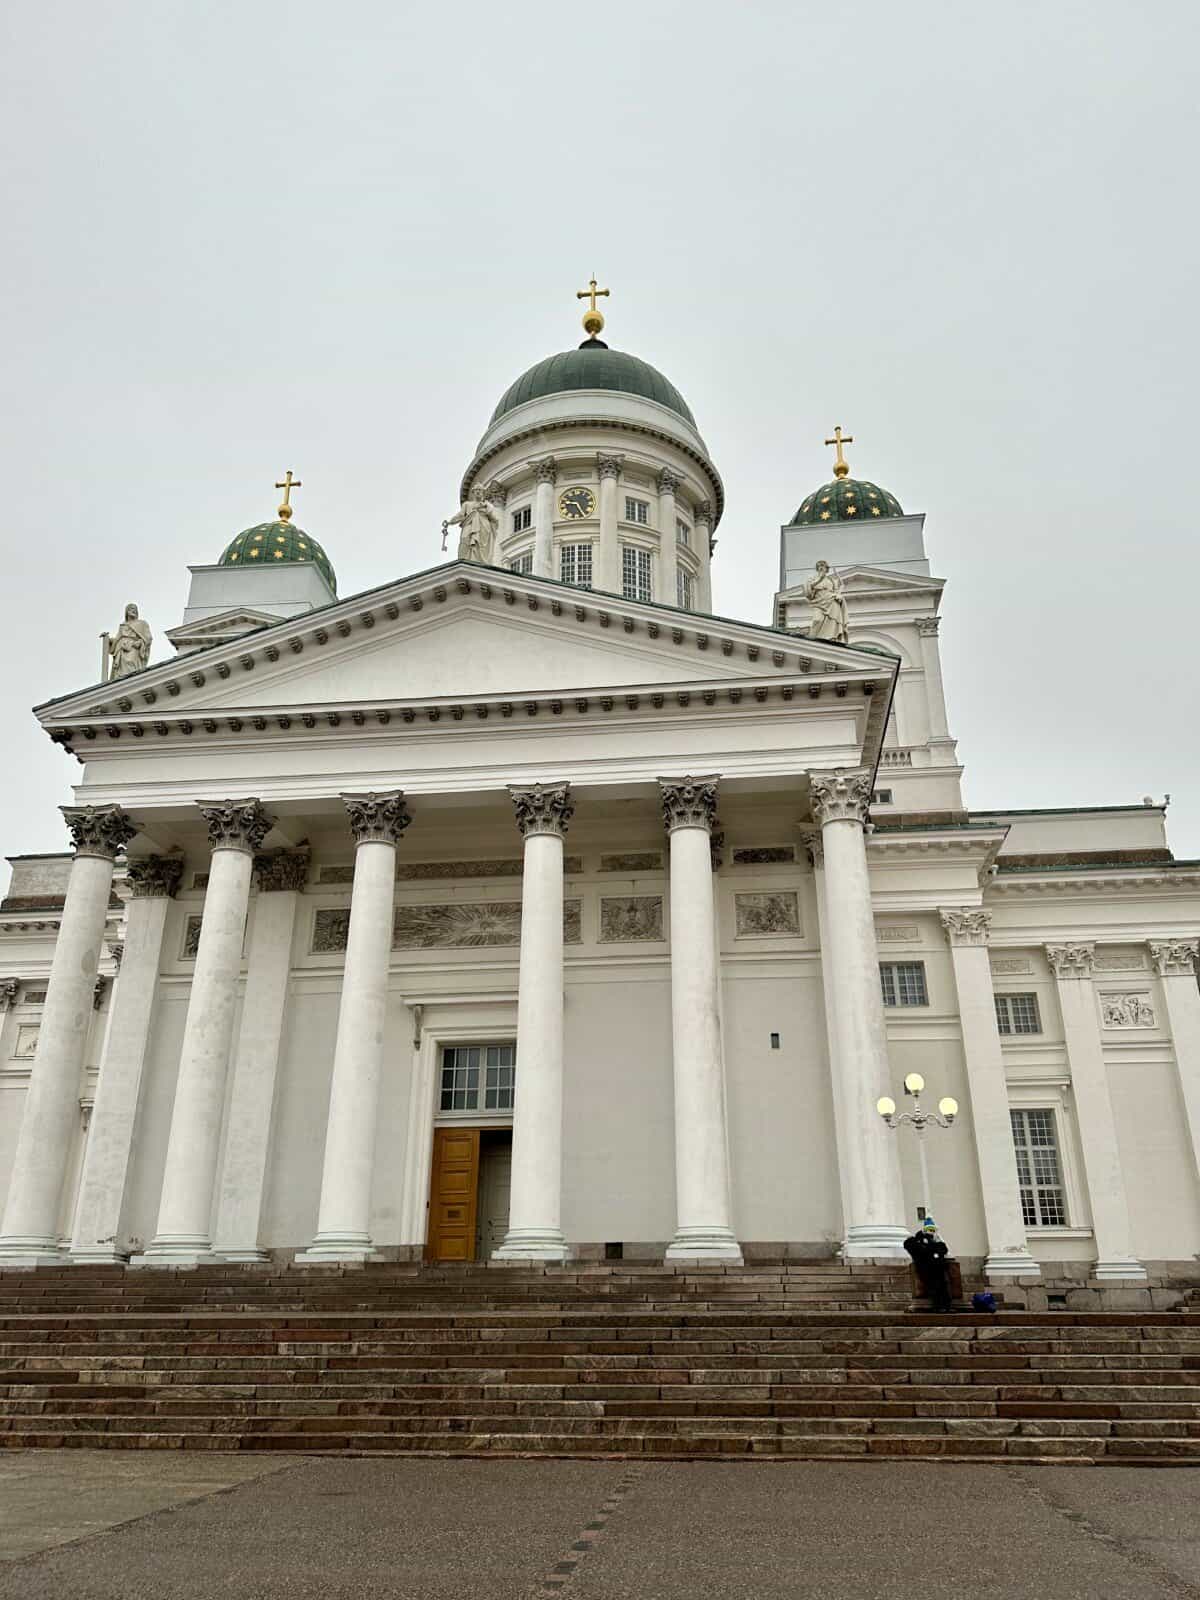 Things to do in Helsinki, Finland - see Uspenski Cathedral & Helsinki Cathedral (two very different styles!)